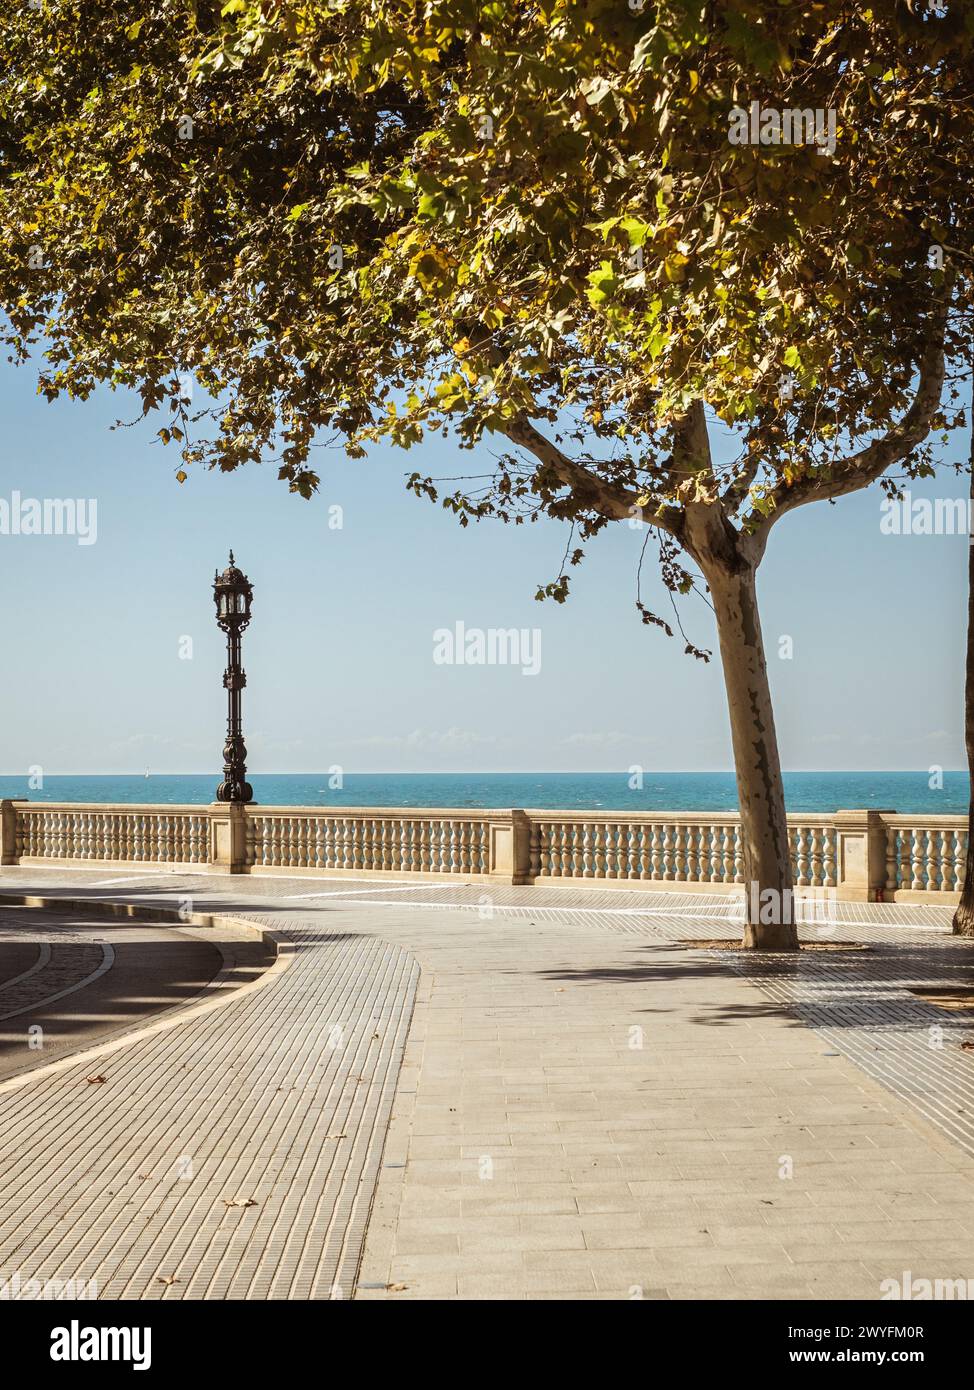 View of the seaside beach promenade of Cadiz under trees and lanterns during a summer vacation, sea view, blue horizon, sunshine Stock Photo